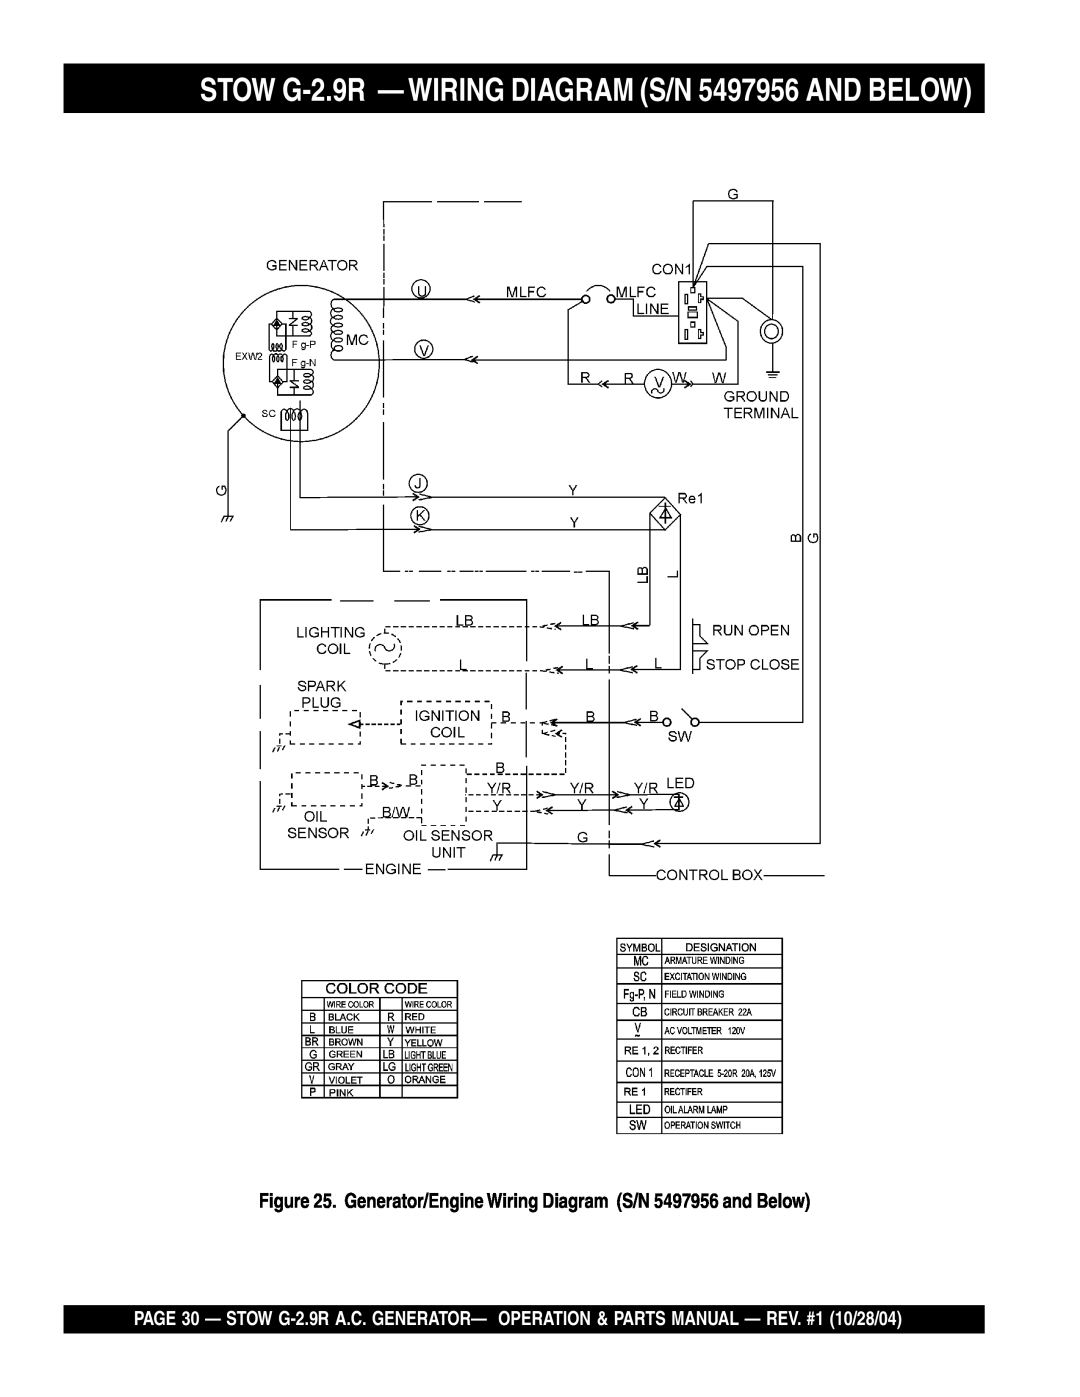 Stow manual STOW G-2.9R - WIRING DIAGRAM S/N 5497956 AND BELOW, Generator/Engine Wiring Diagram S/N 5497956 and Below 